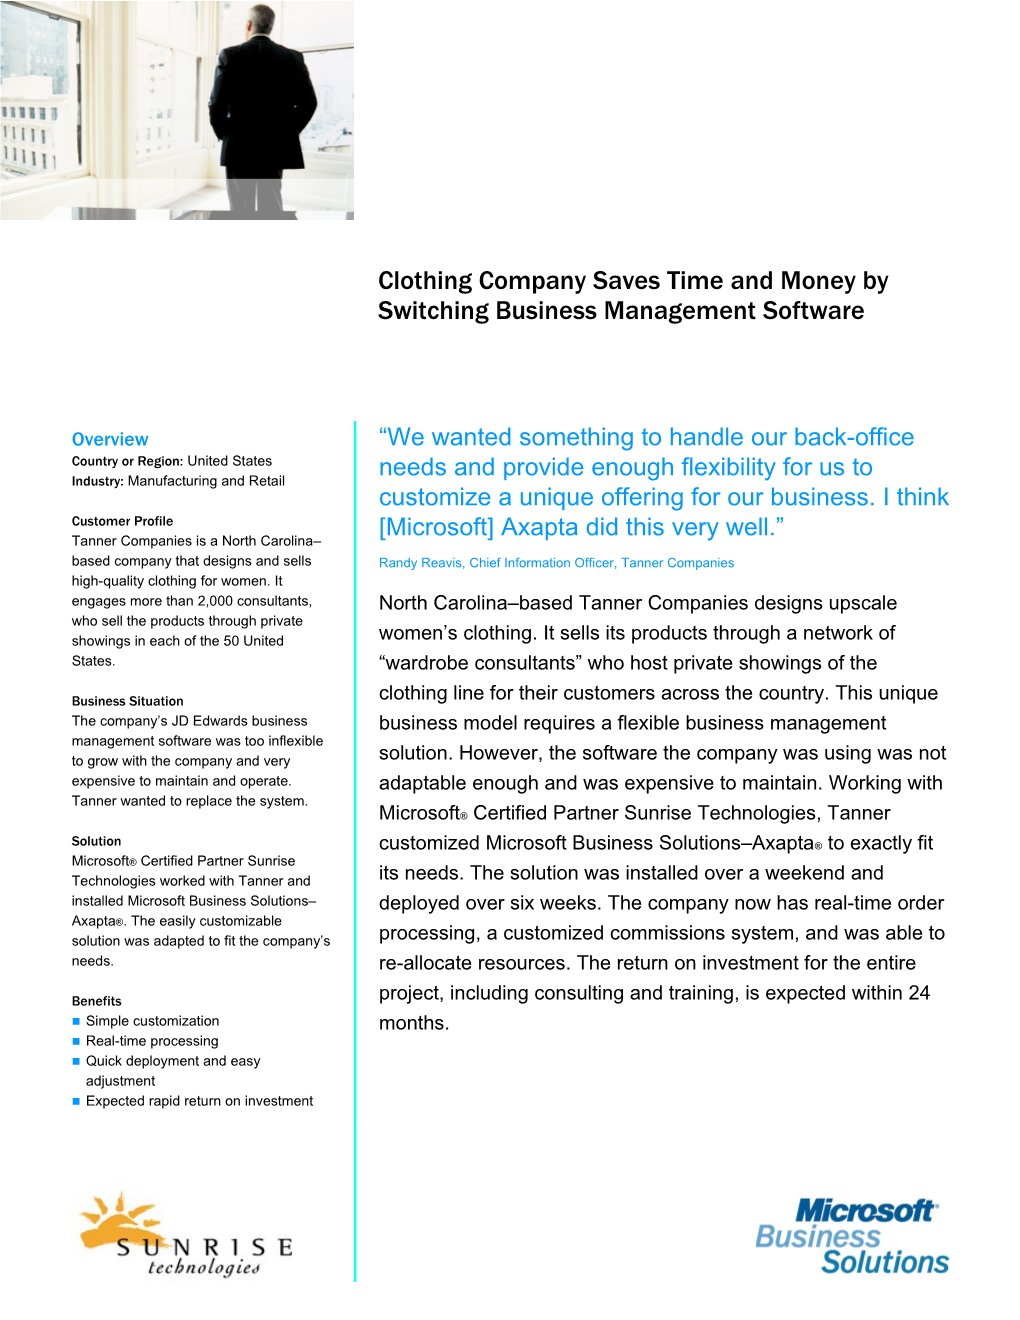 Clothing Company Saves Time and Money by Switching Business Management Software